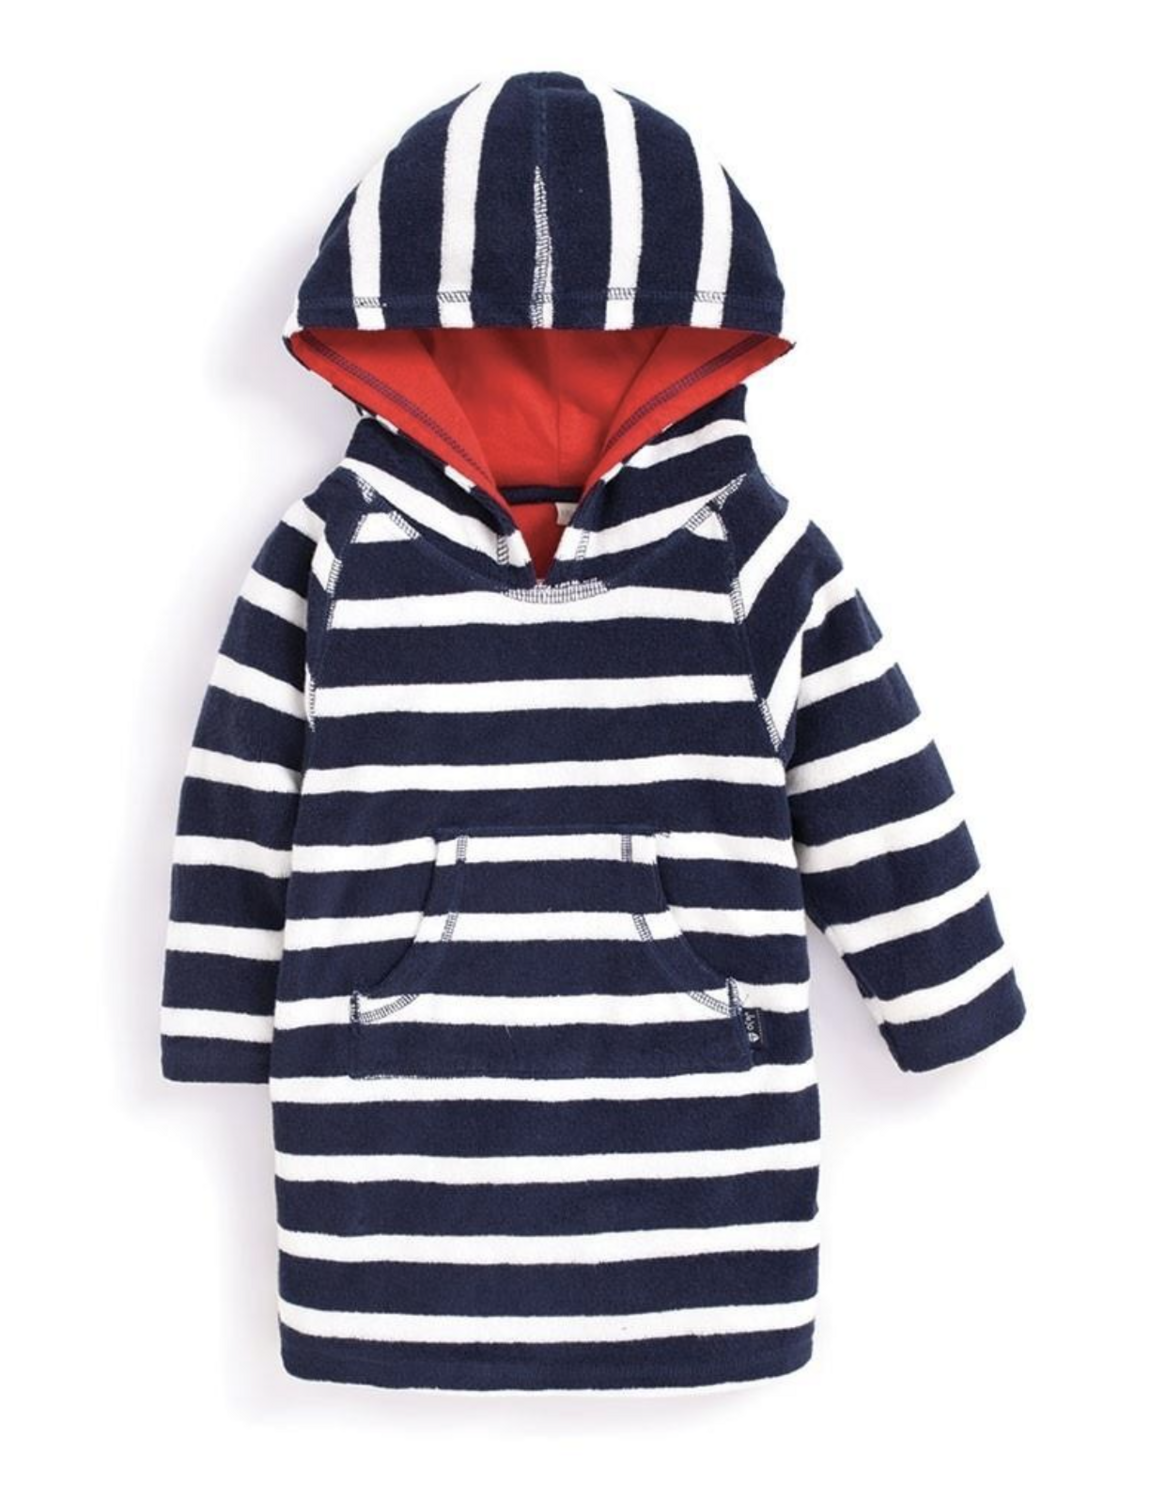 Stripe Towelling Pull On Navy 4/5